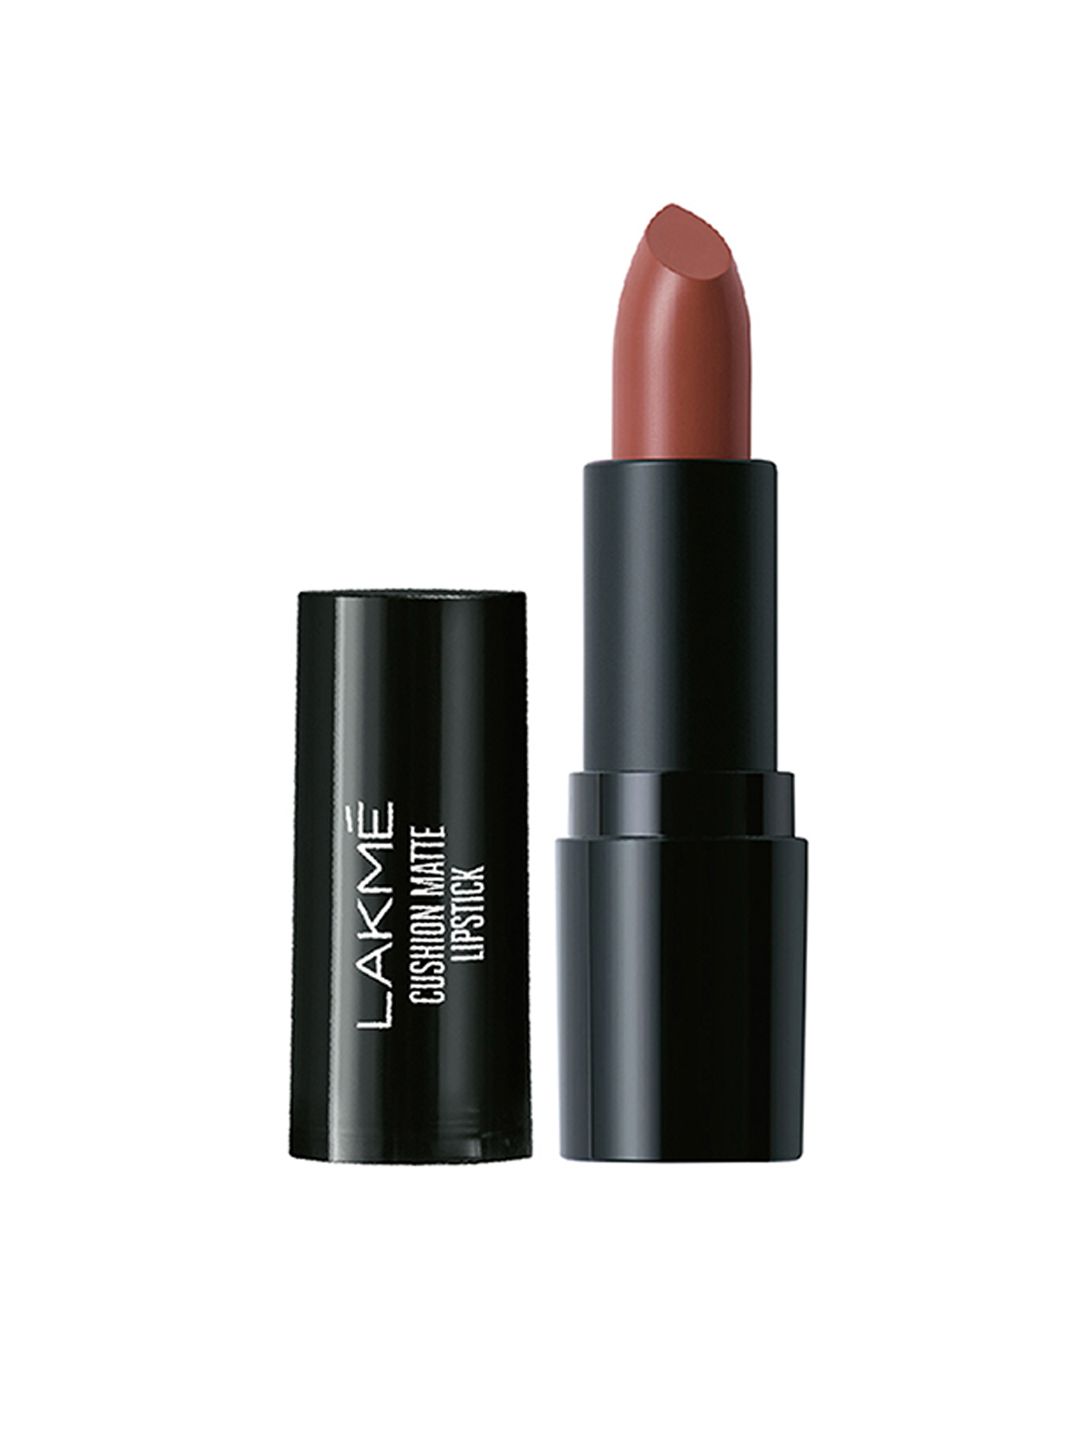 Lakme Cushion Matte Lipstick with French Rose Oil - Brown Sugar CN2 Price in India